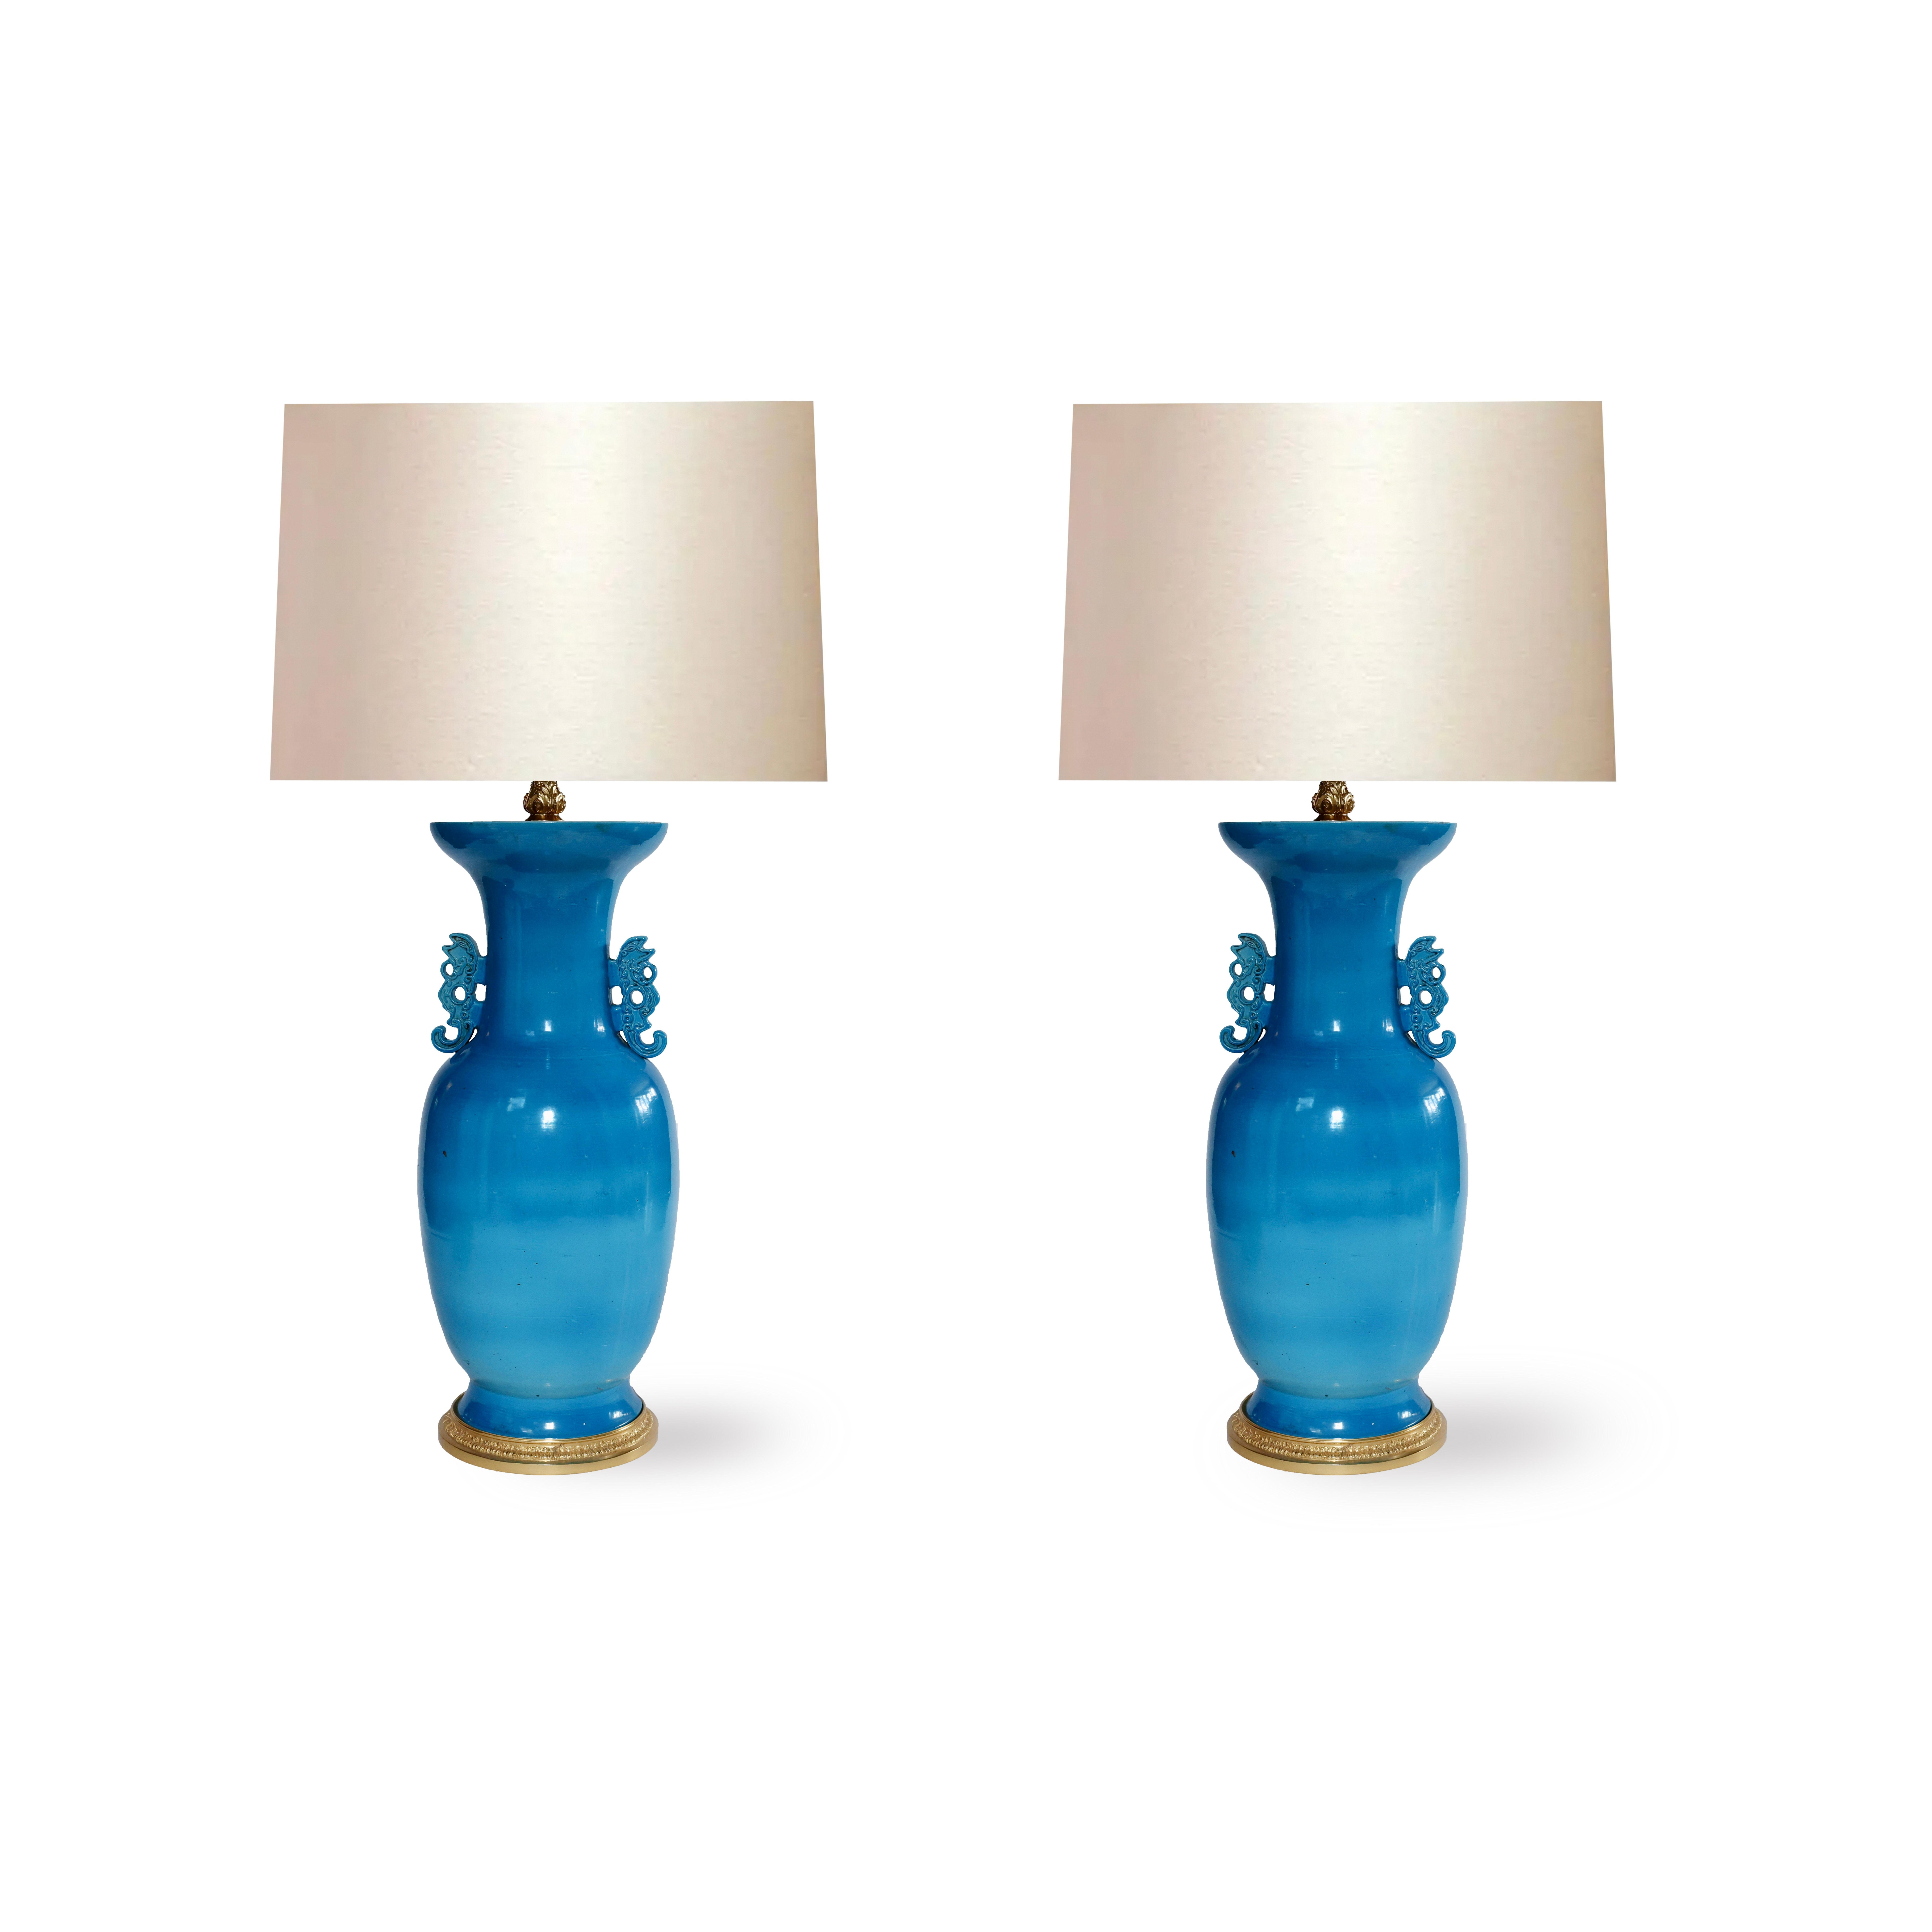 Large Pair of turquoise blue porcelain lamps with Finley carved gilded bases.

lampshades are not included.

To the top of the vase 24 inch